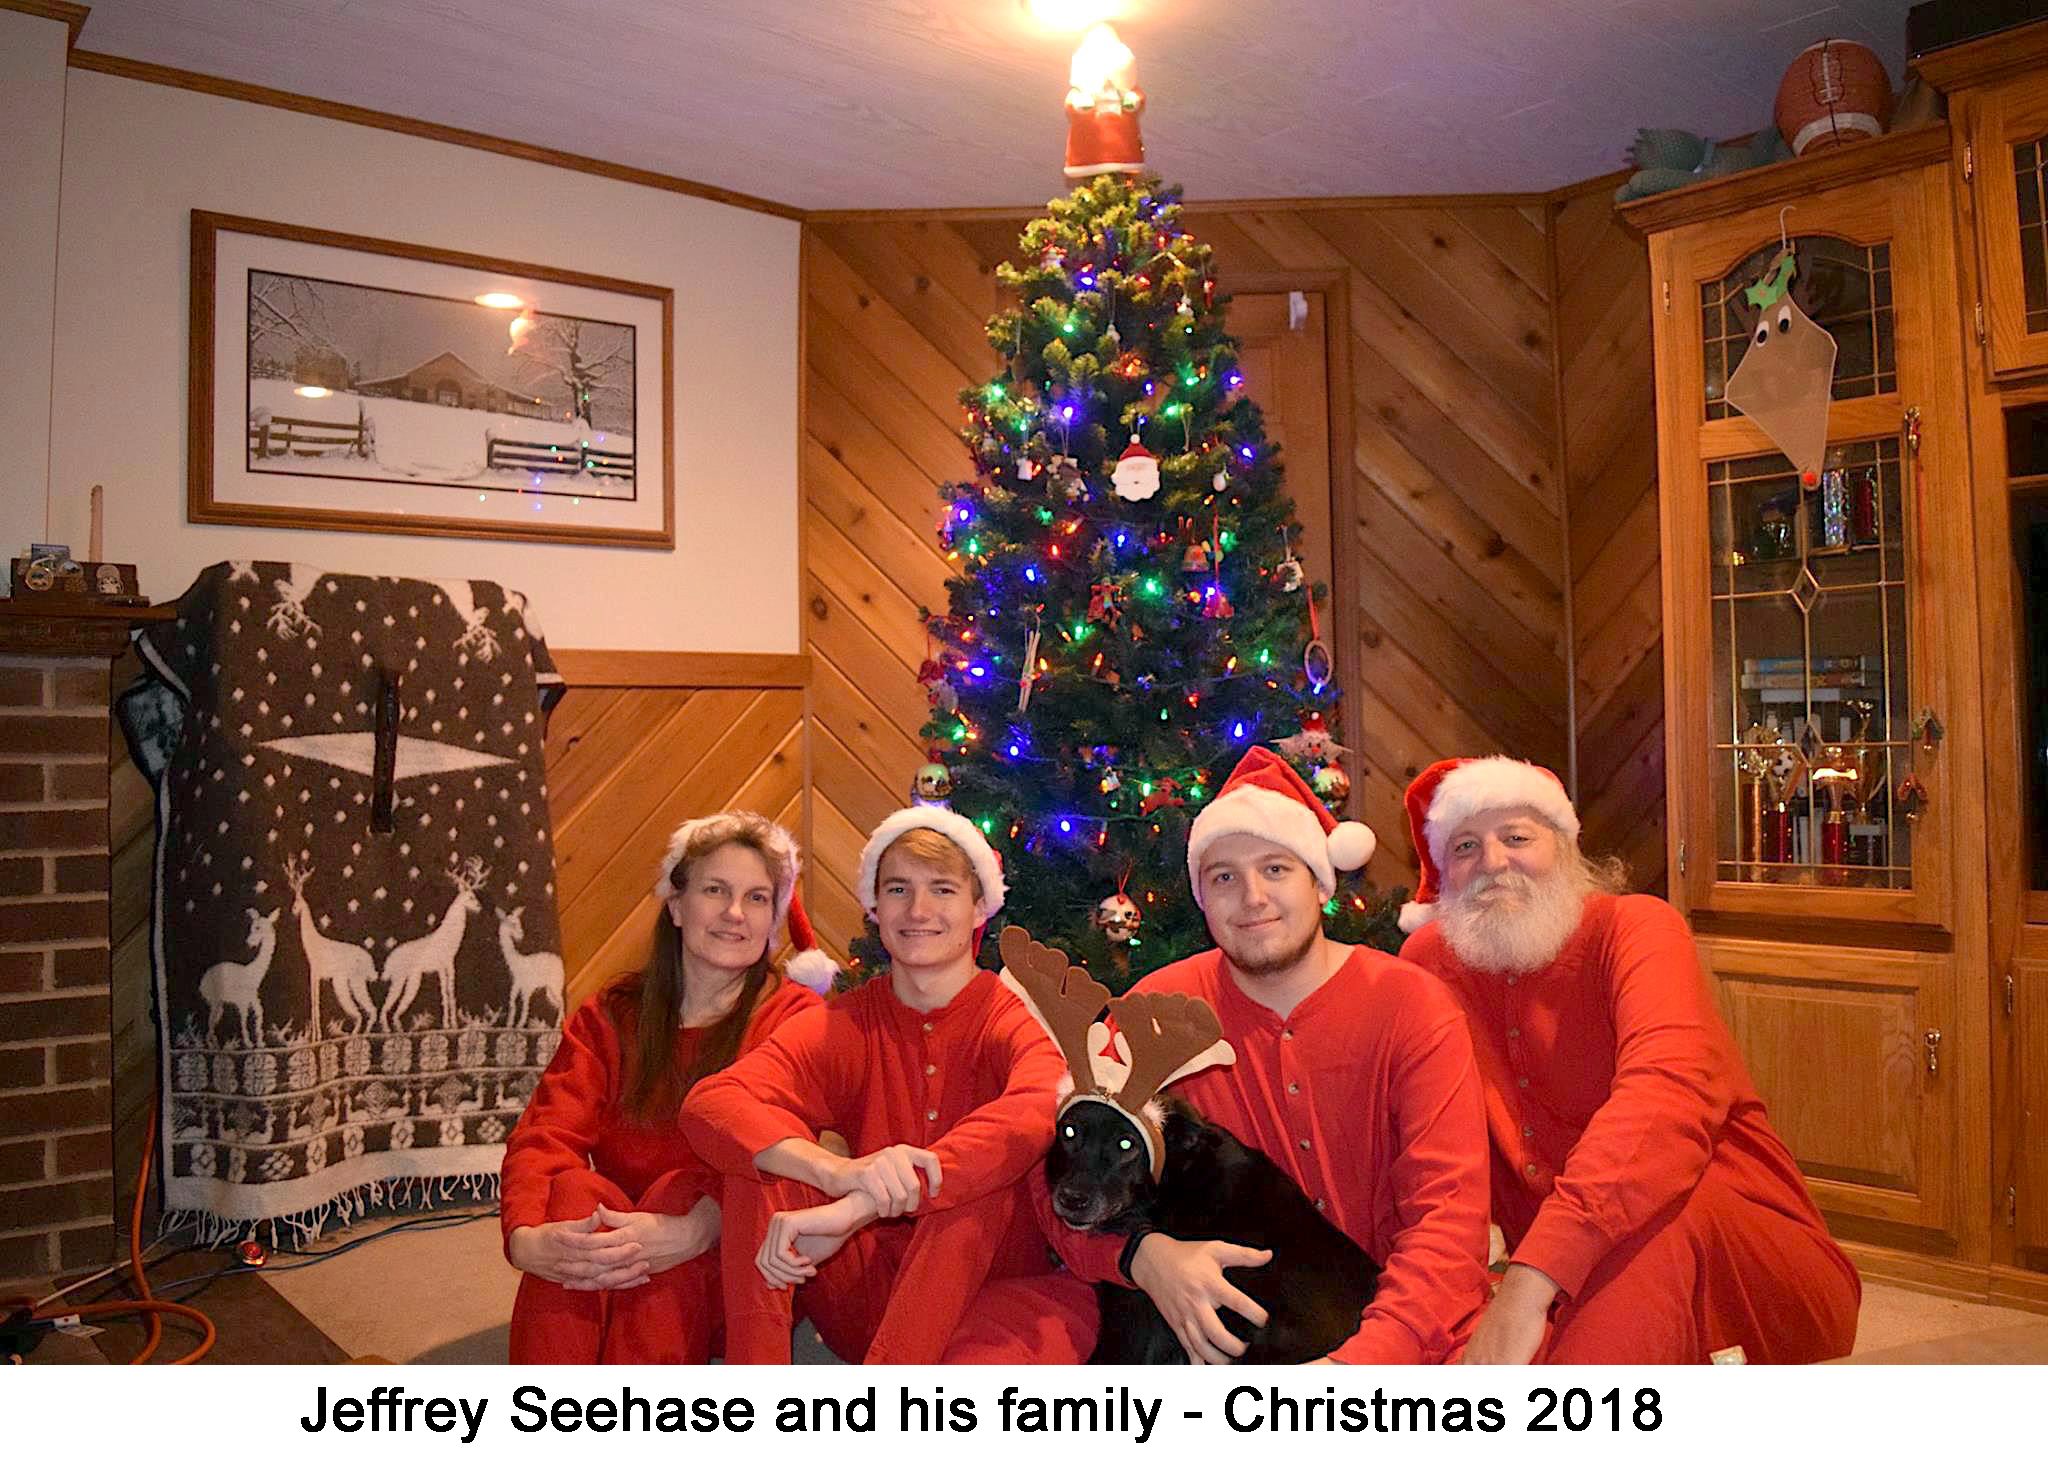 The family is sitting in Santa suits with a dog wearing reindeer antlers.
        They are in a wood paneled room with the decorated tree behind them. 